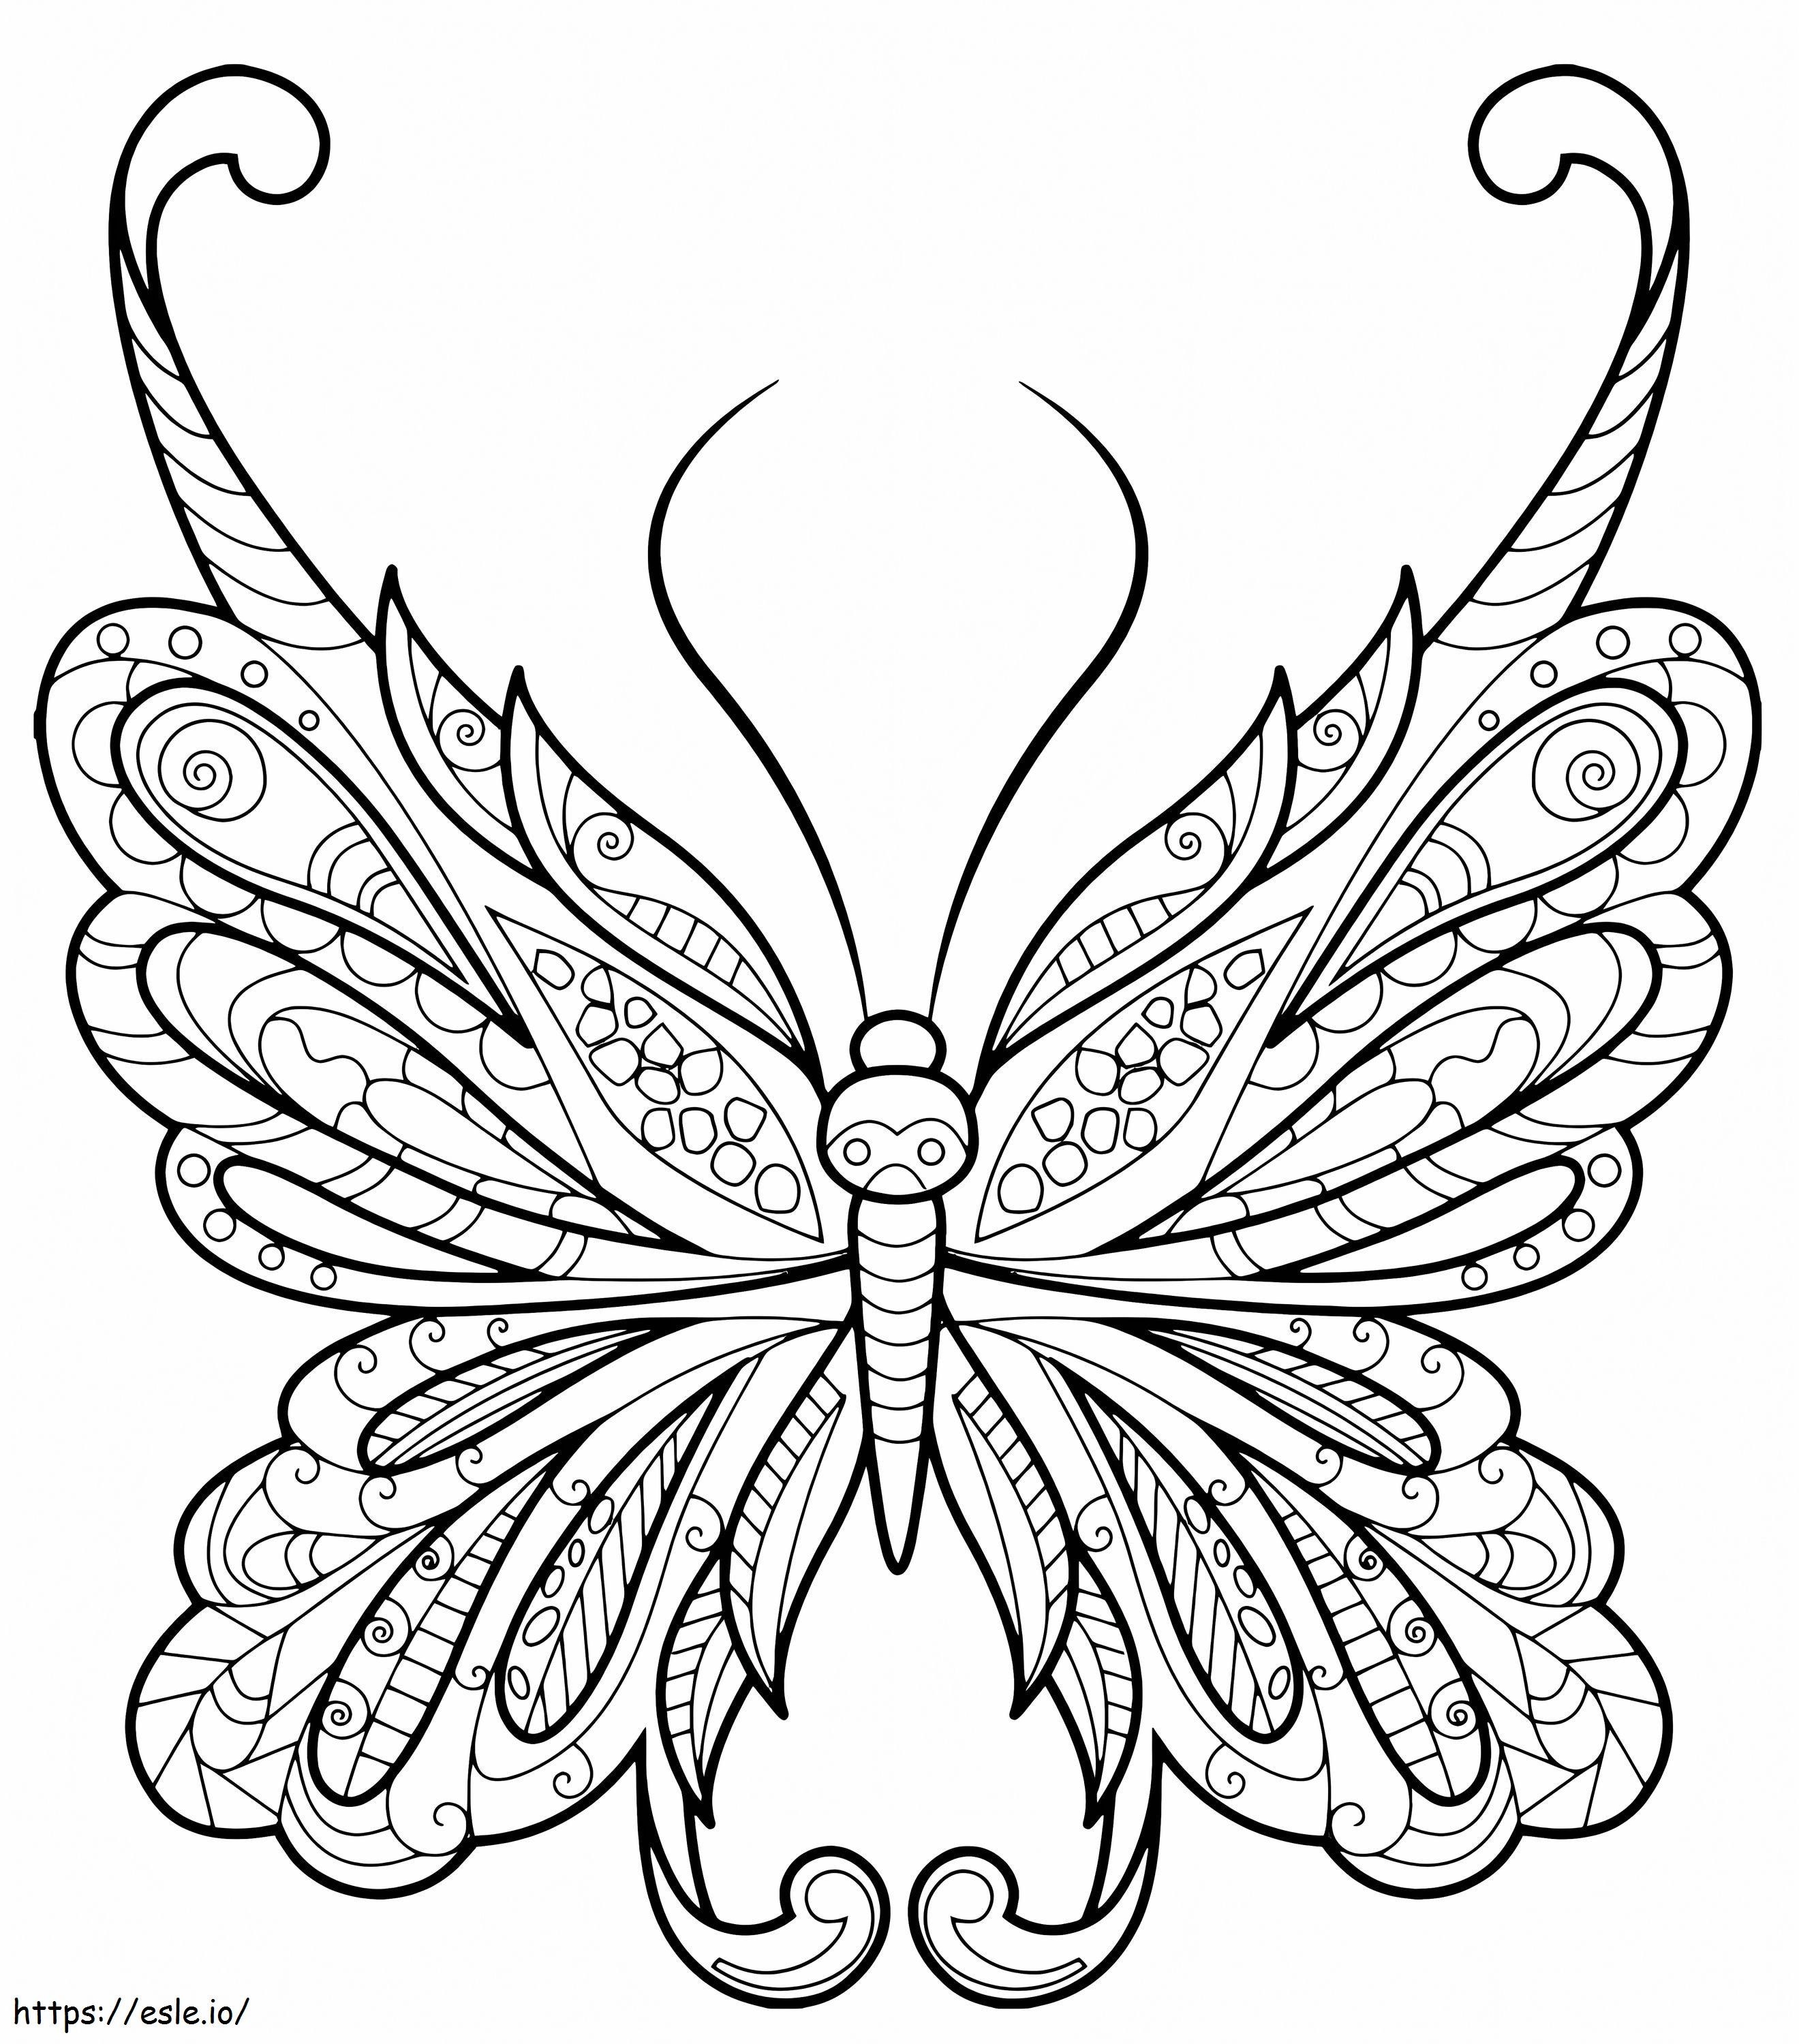 Butterfly Zentangle Pretty Patterns 1 coloring page